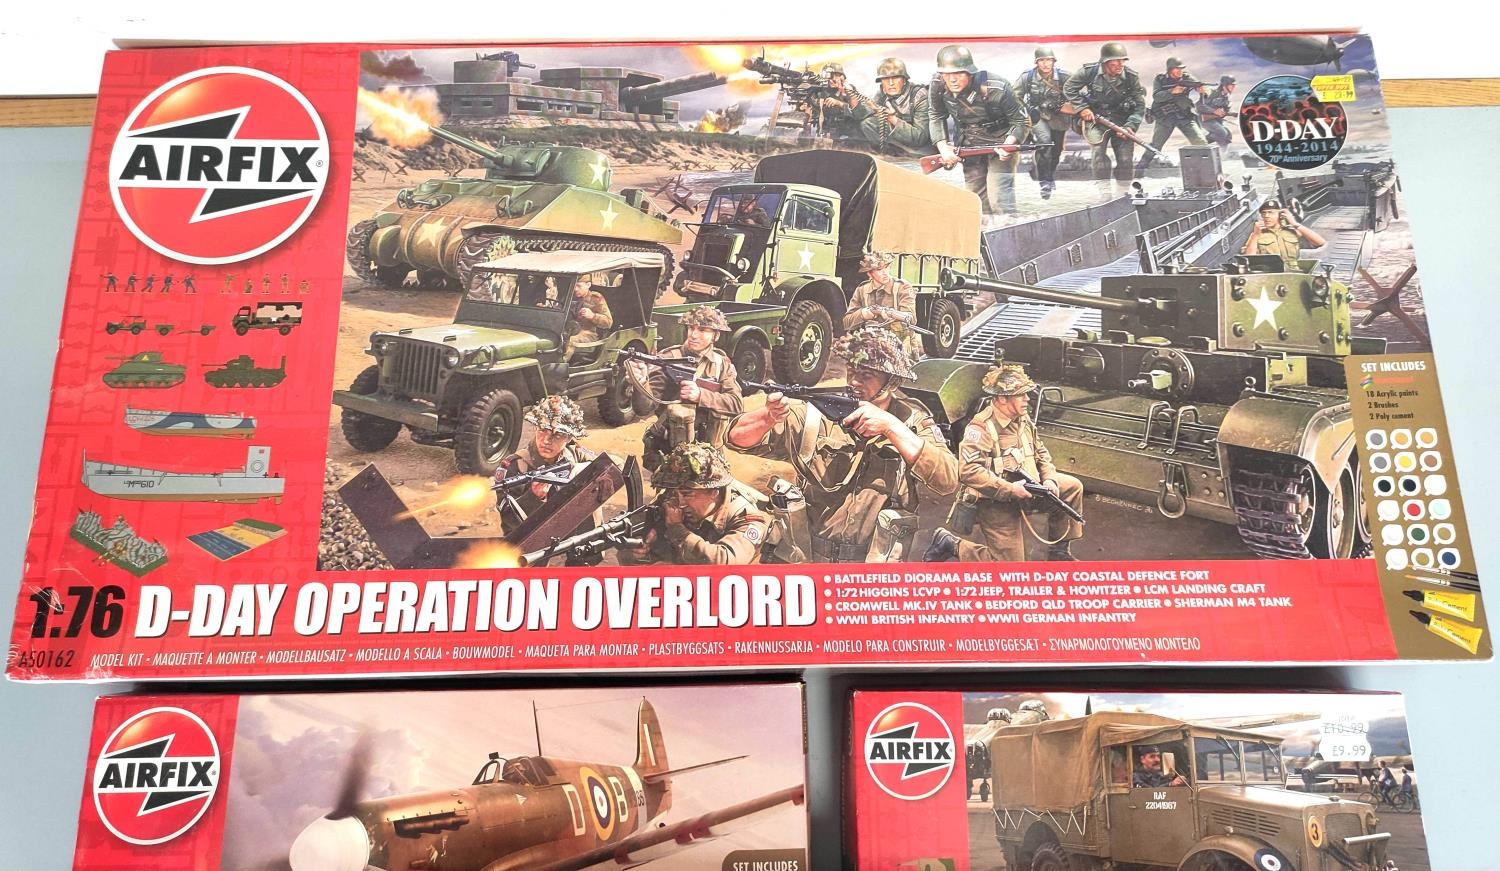 Airfix. Model construction kits relating to WW2 vehicles to include D-Day Operation Overlord kit - Image 2 of 5